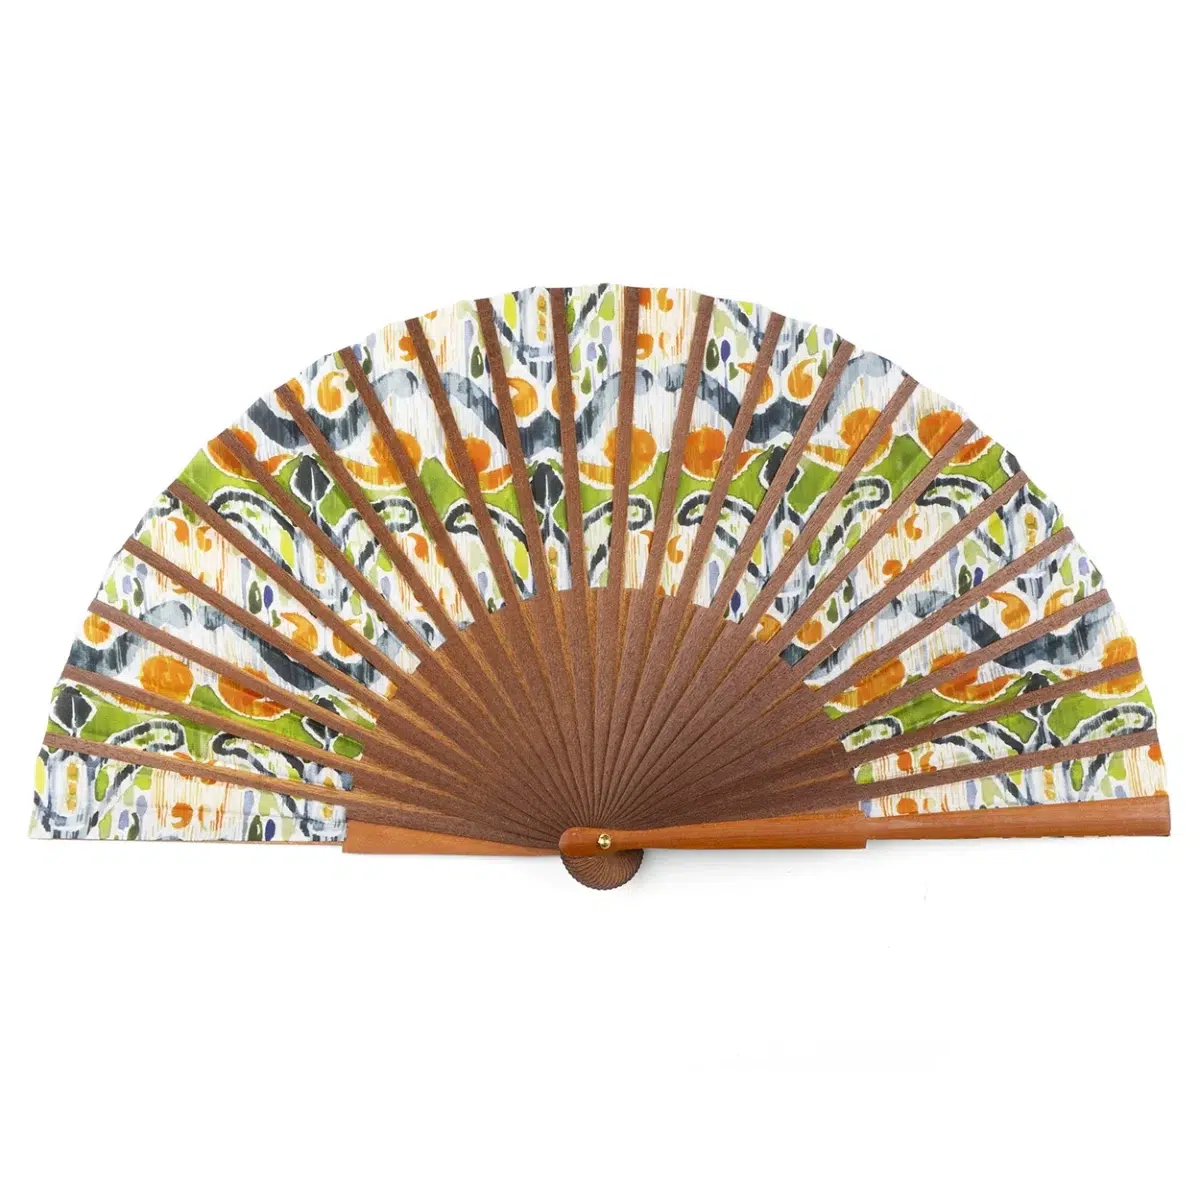 Handcrafted Silk and Wood Fan with Colorful Blue, Green, and Orange Print.